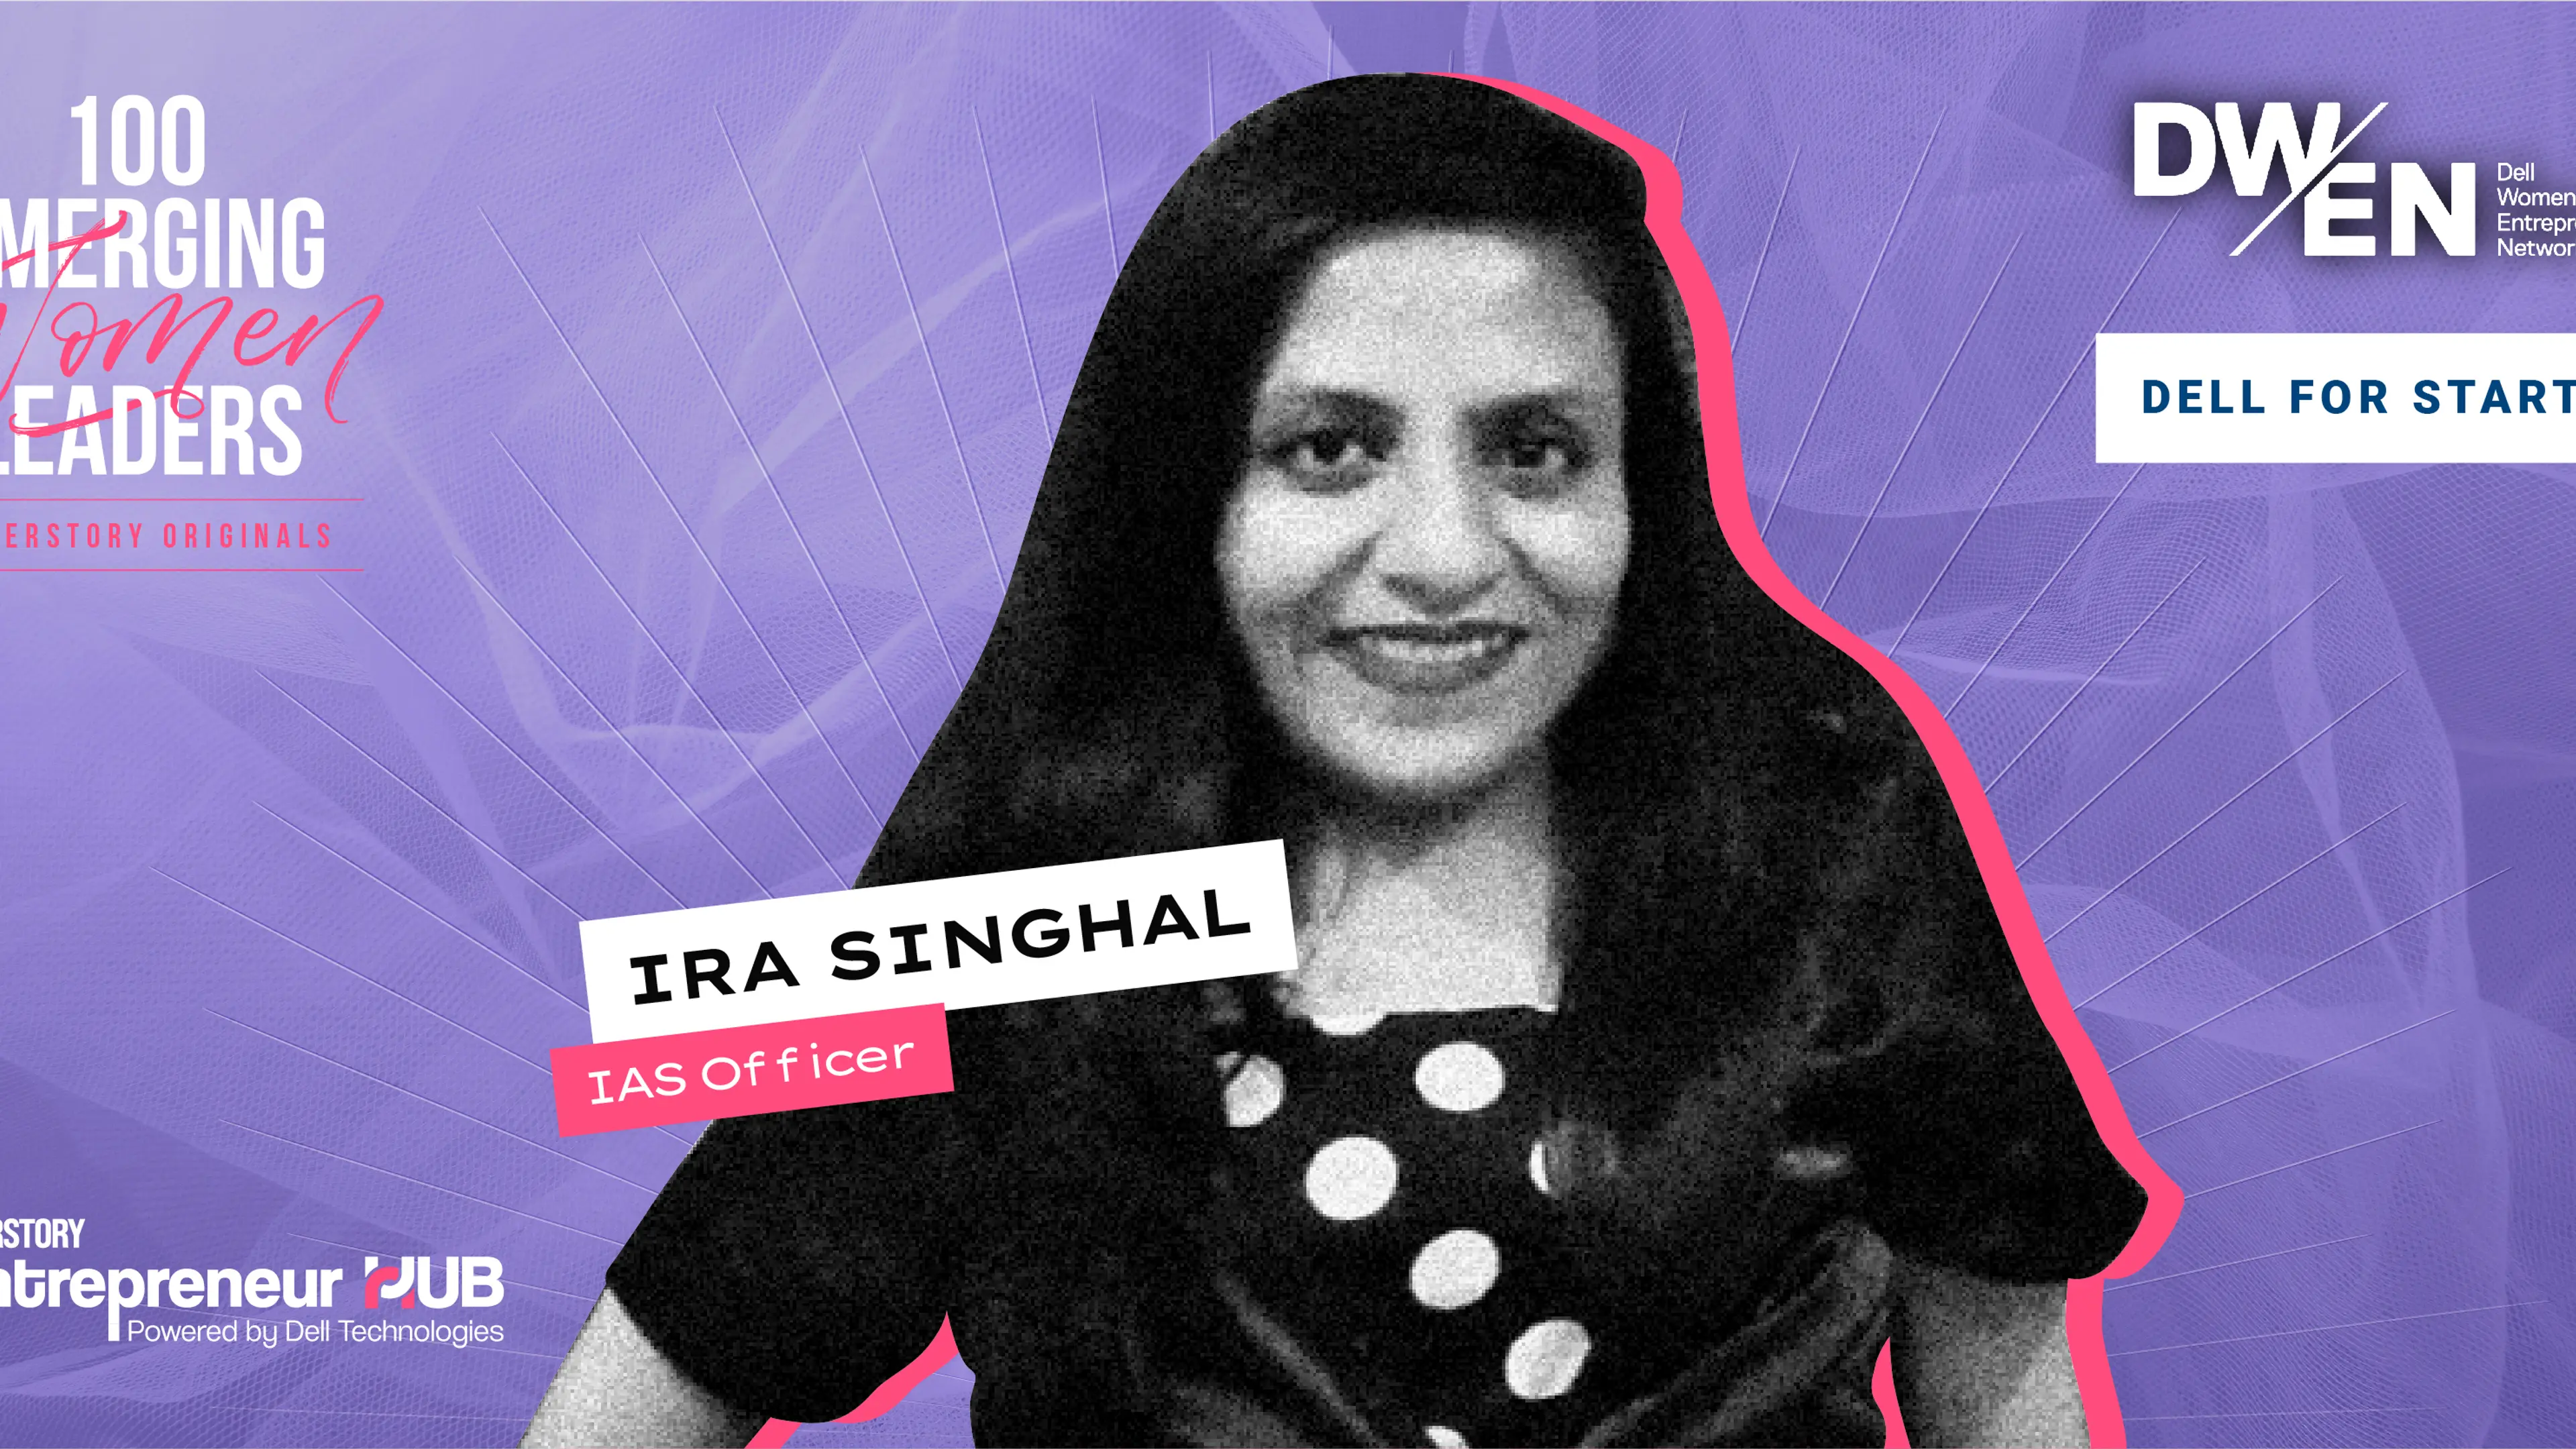 [100 Emerging Women Leaders] Ira Singhal is a beacon of hope for women with disabilities